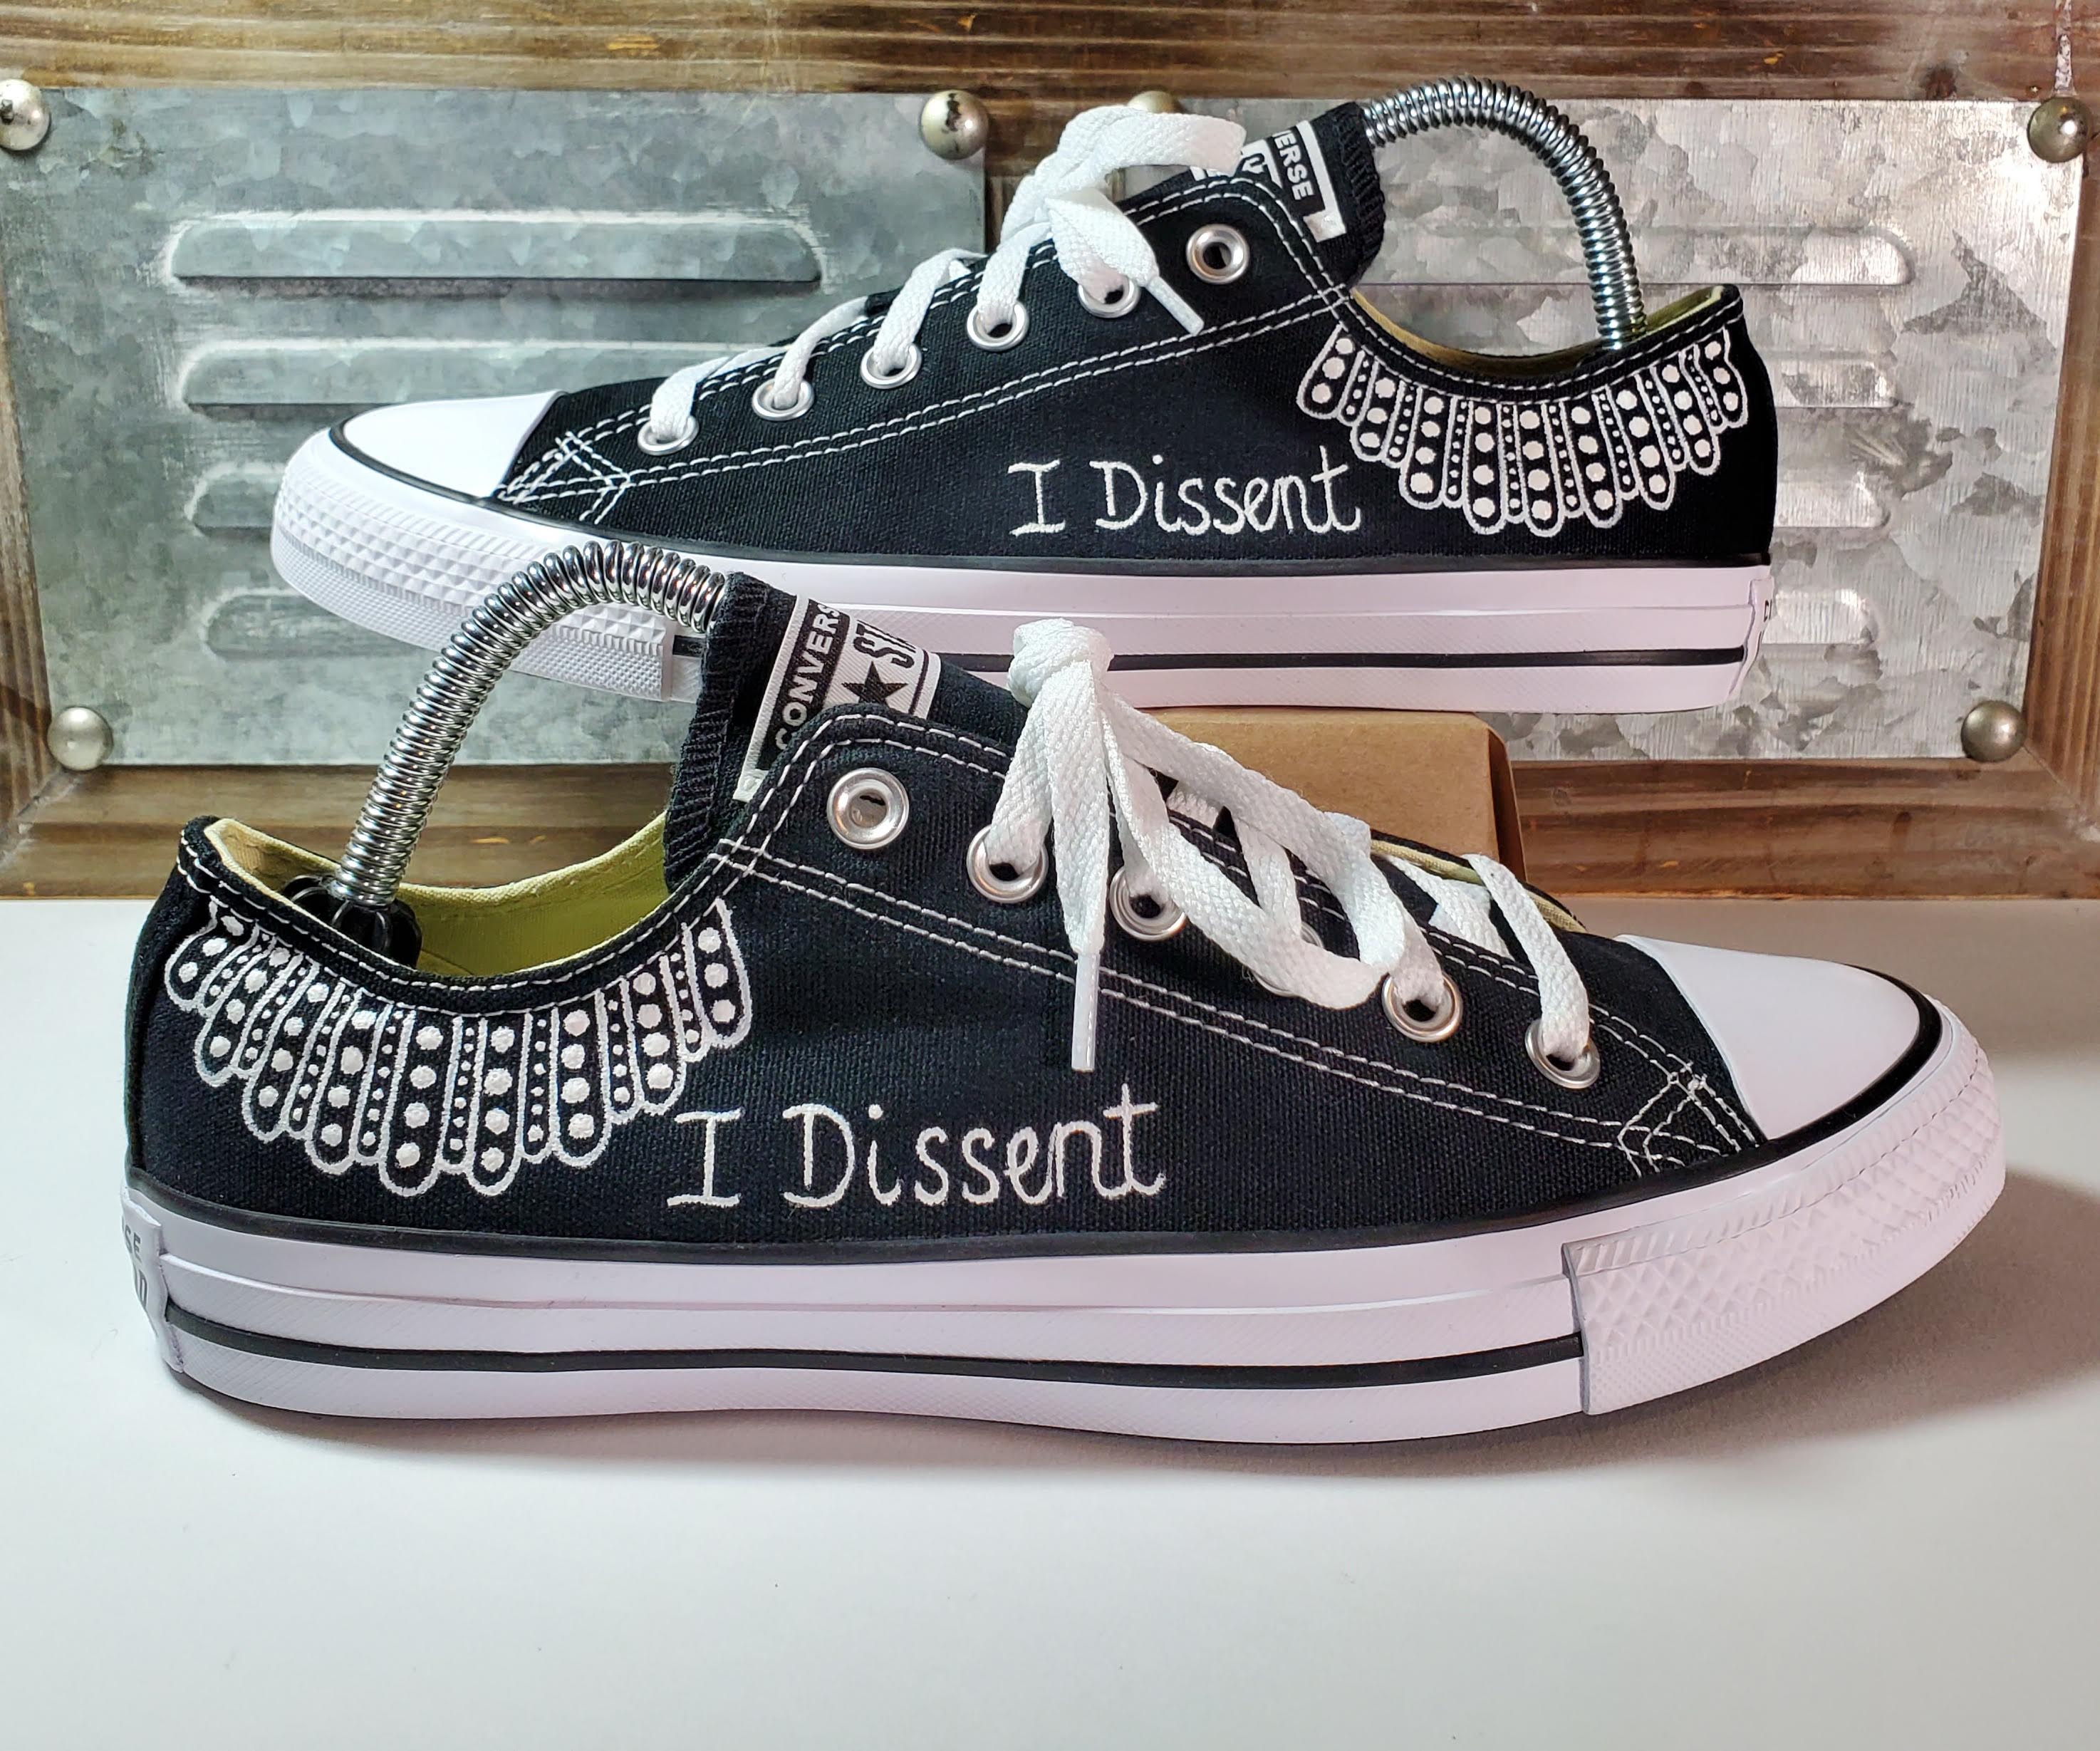 Ruth Bader Ginsberg Converse "I Dissent" Collar - DOUBLE SIDE Stirling